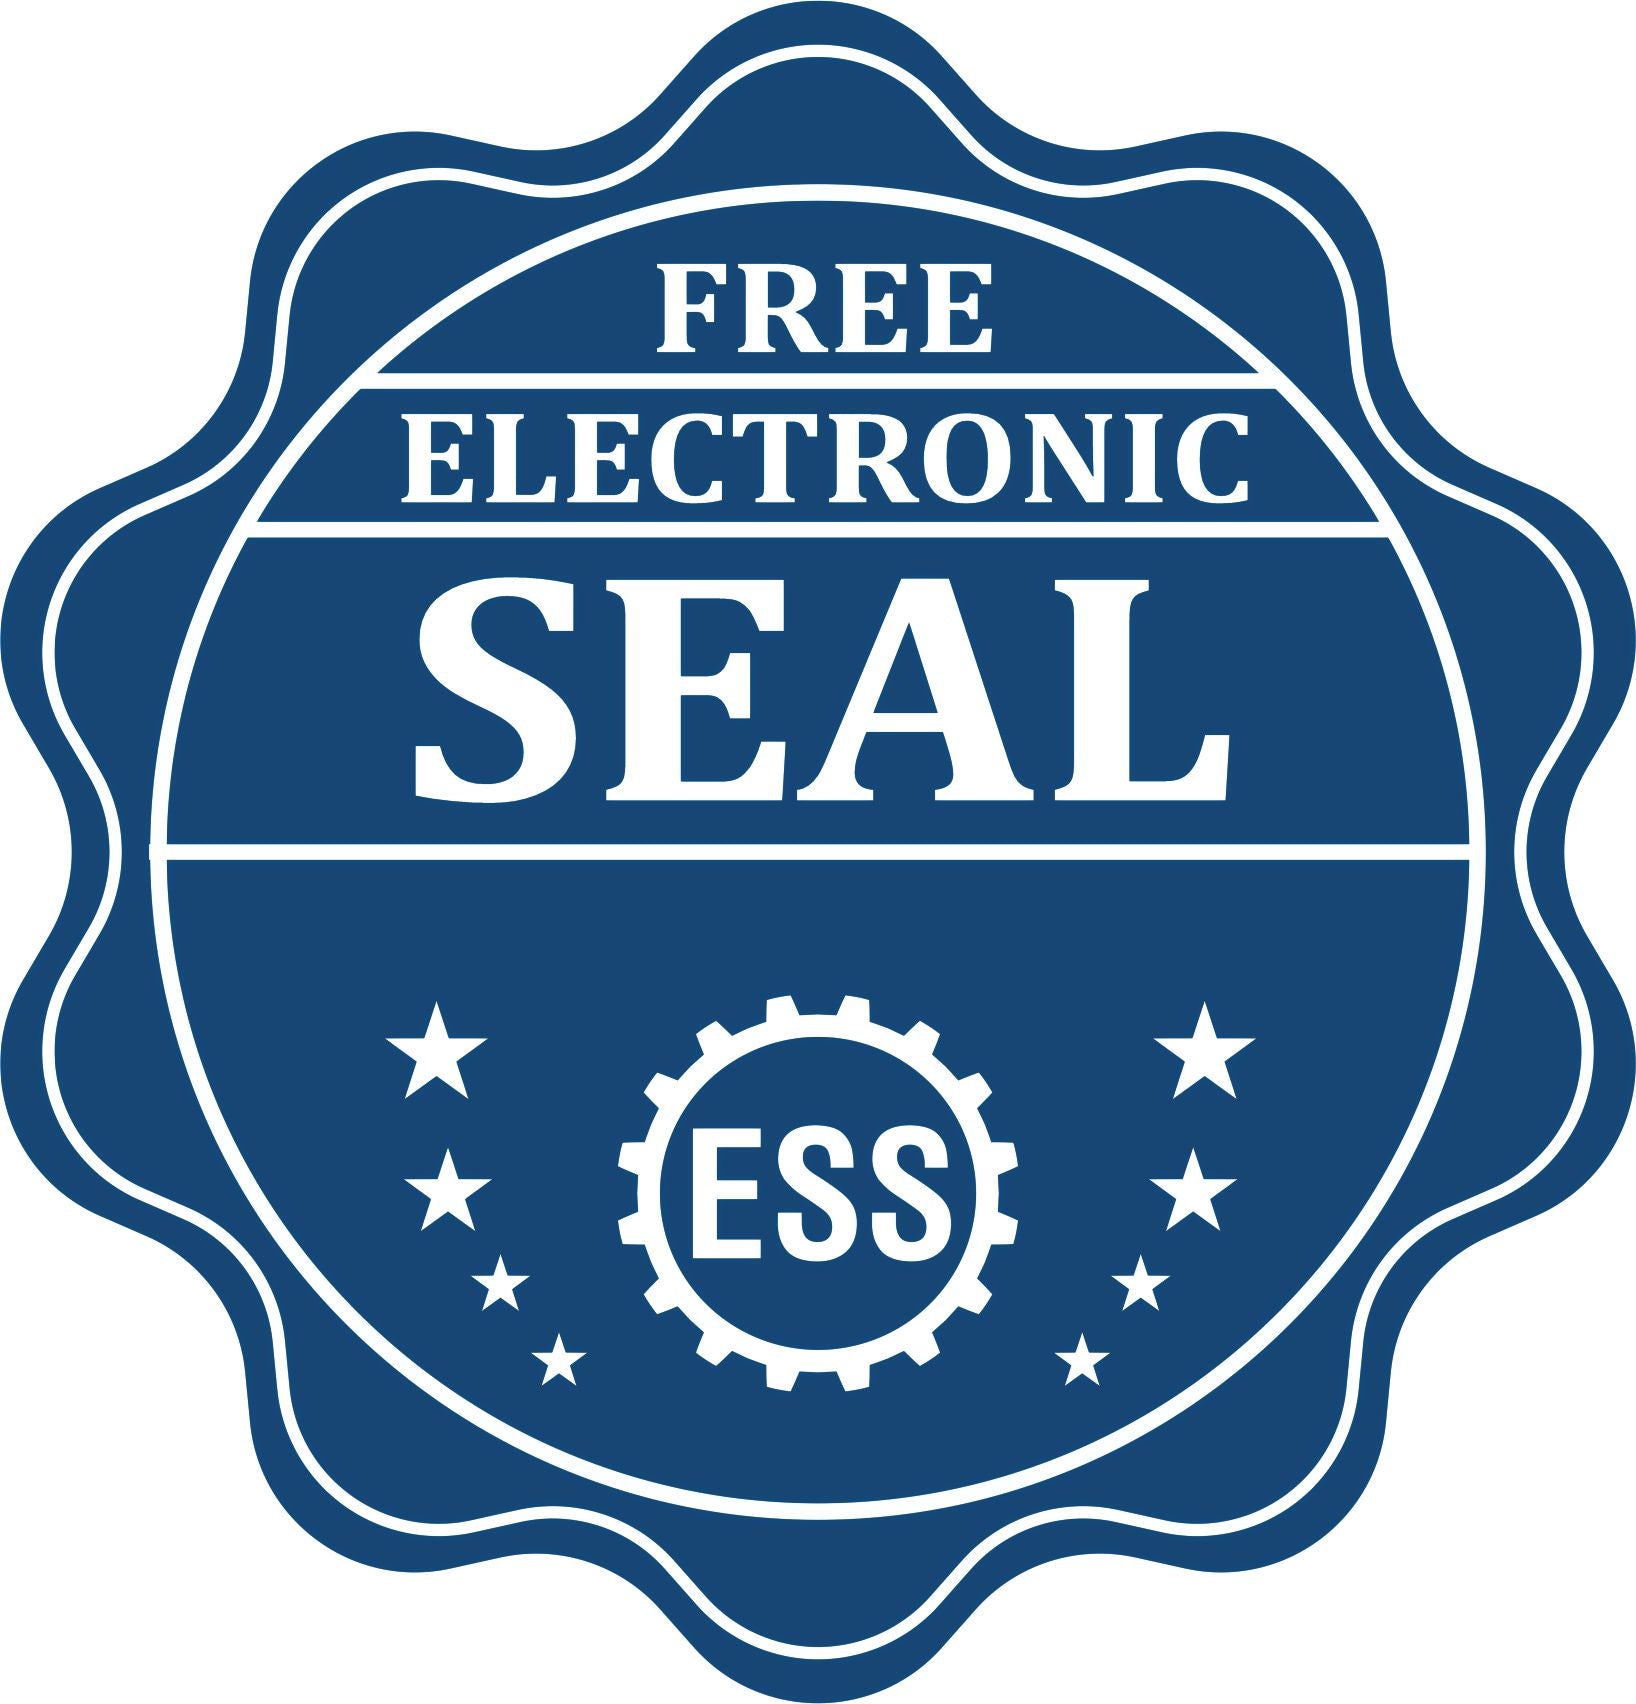 A badge showing a free electronic seal for the Slim Pre-Inked Rectangular Notary Stamp for Georgia with stars and the ESS gear on the emblem.